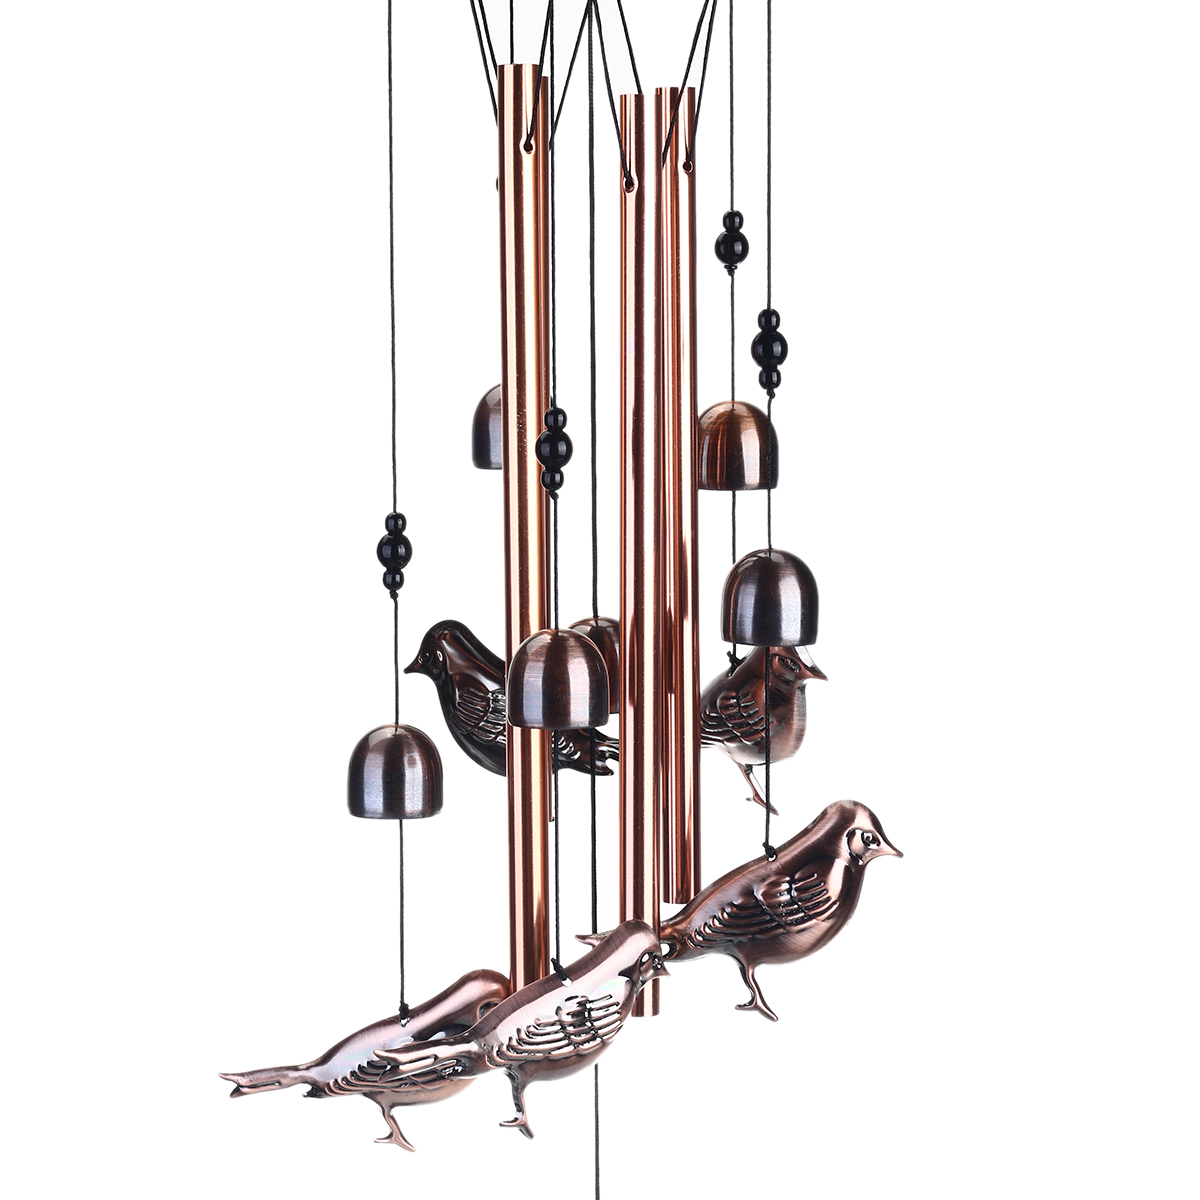 Brass-Bell-Wind-Chime-Ornaments-European-And-American-Garden-Home-Decoration-1777951-9